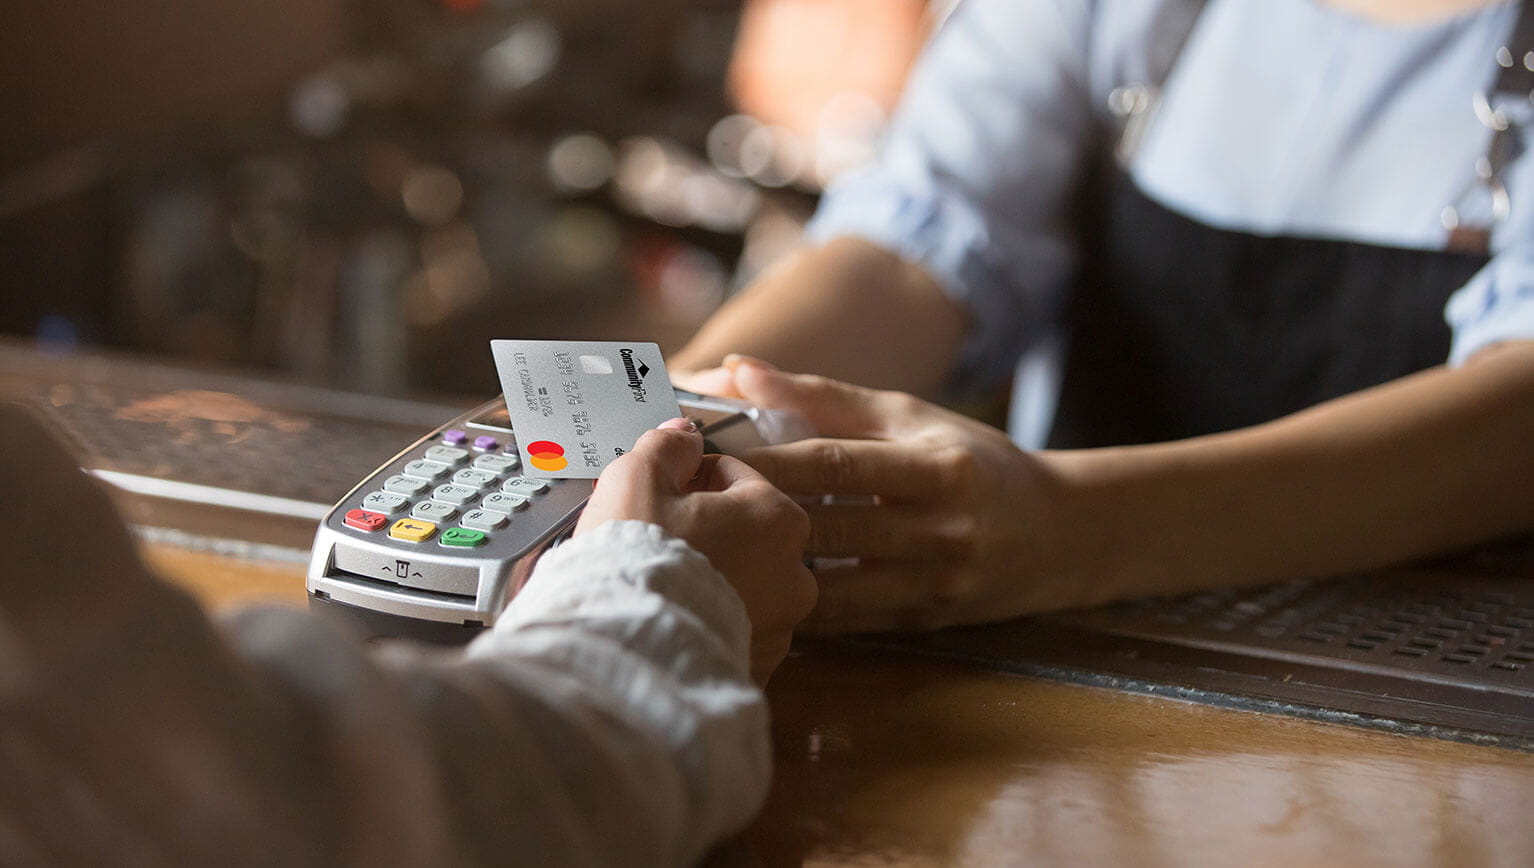 Safer and faster transactions with contactless payments